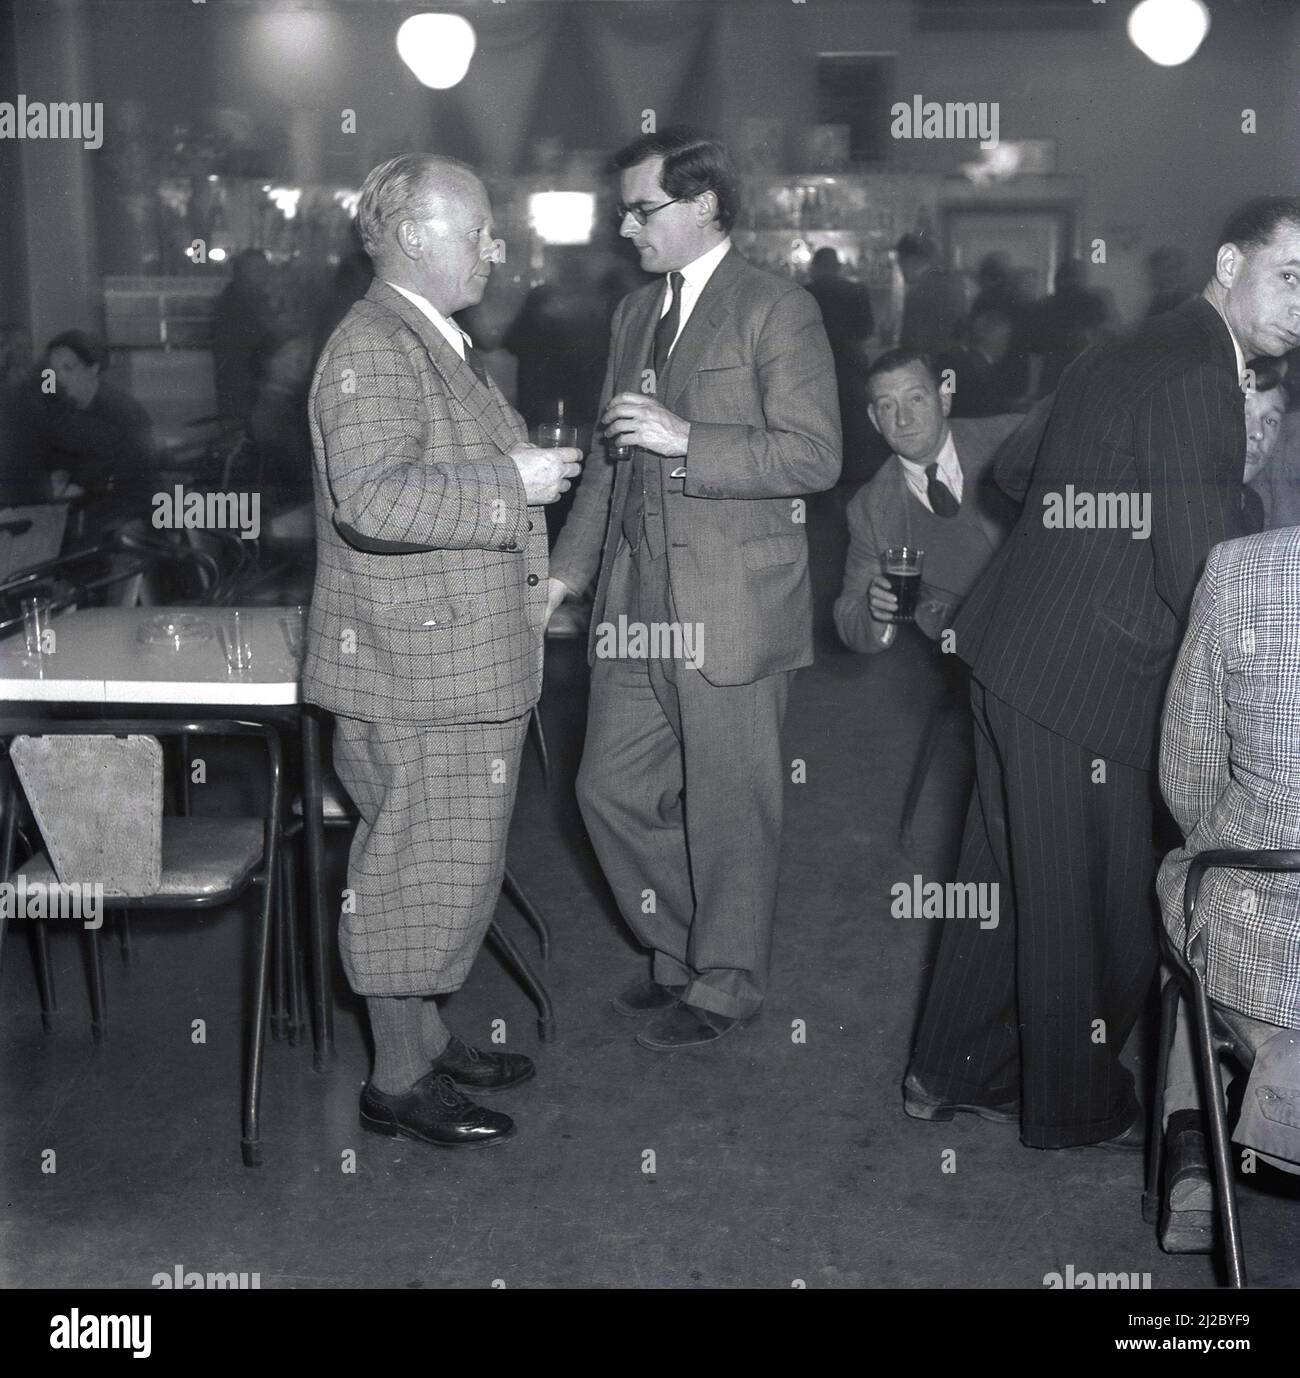 1950s, historical, at a company social club, employees enjoy an evening function with colleagues. Two smartly dressed gentleman in conversation, one in a traditional suit and tie, the other, older man, wearing a check suit with plus four trousers or breeches. Post WW2 saw the formation of the The Steel Company of Wales as a public company with a mission to modernise steel production in South Wales and the site at Port Talbot/Margam was redeveloped. Abbey Works as it was named, became in the late 1950s and 60s, the biggest producer of steel in Europe and Port Talbot was the 'city of steel'. Stock Photo